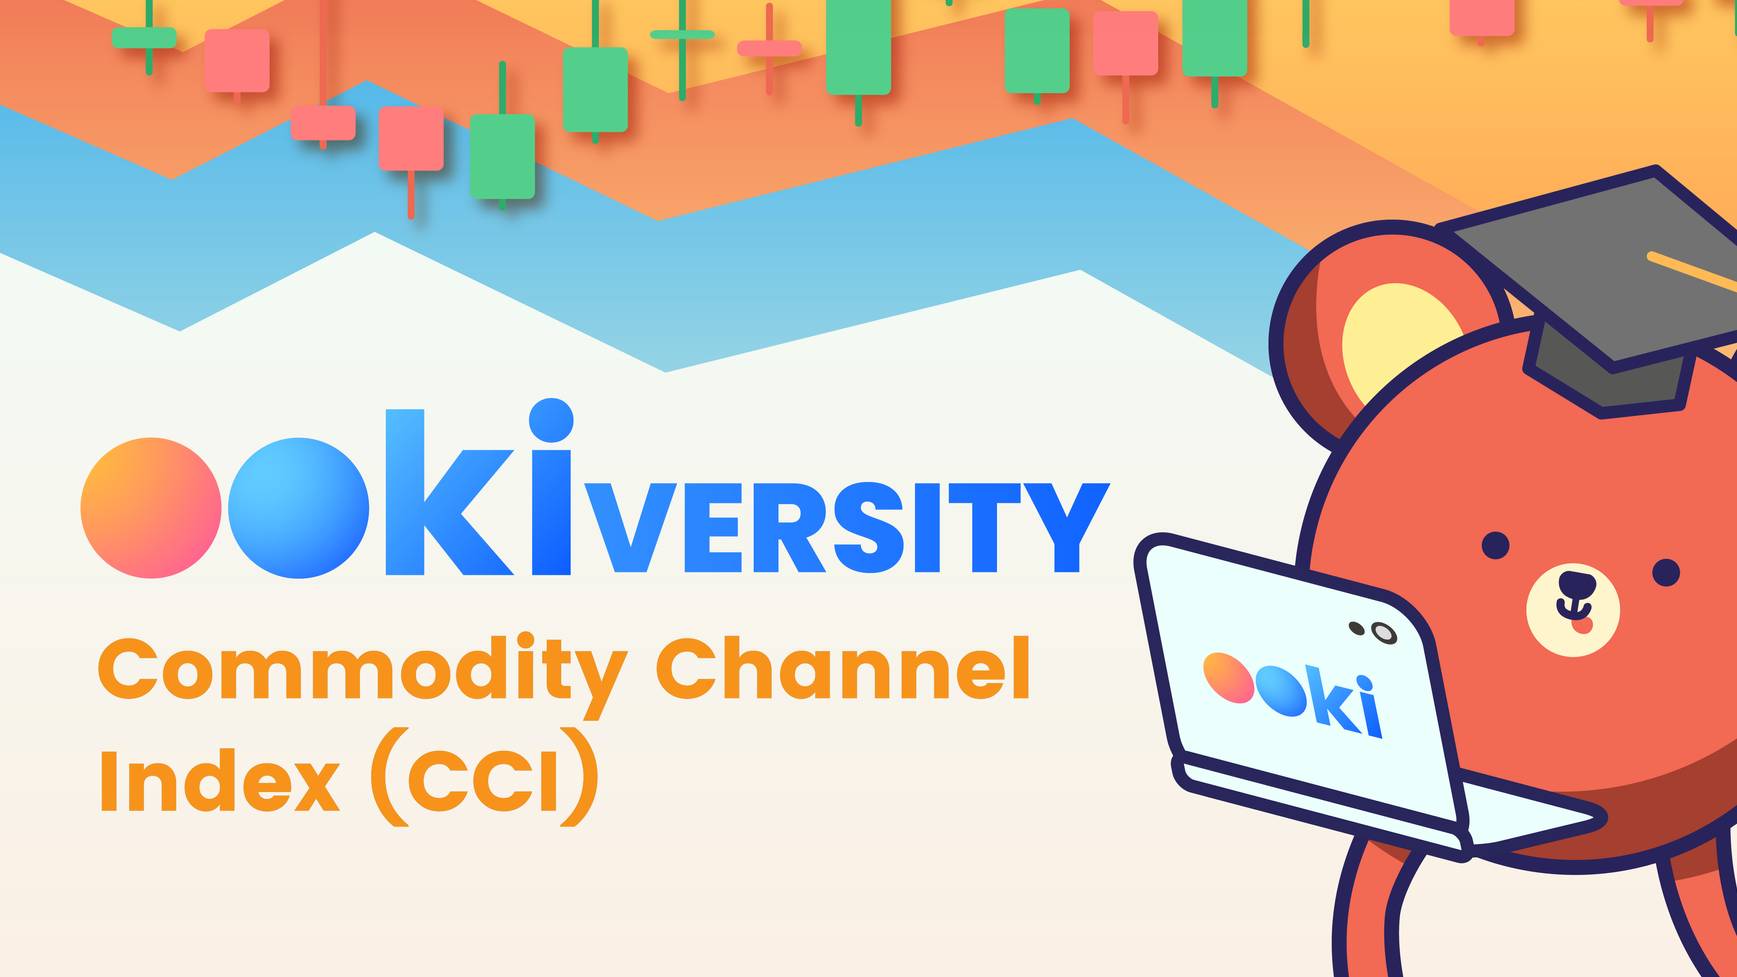 Ookiversity: Commodity Channel Index